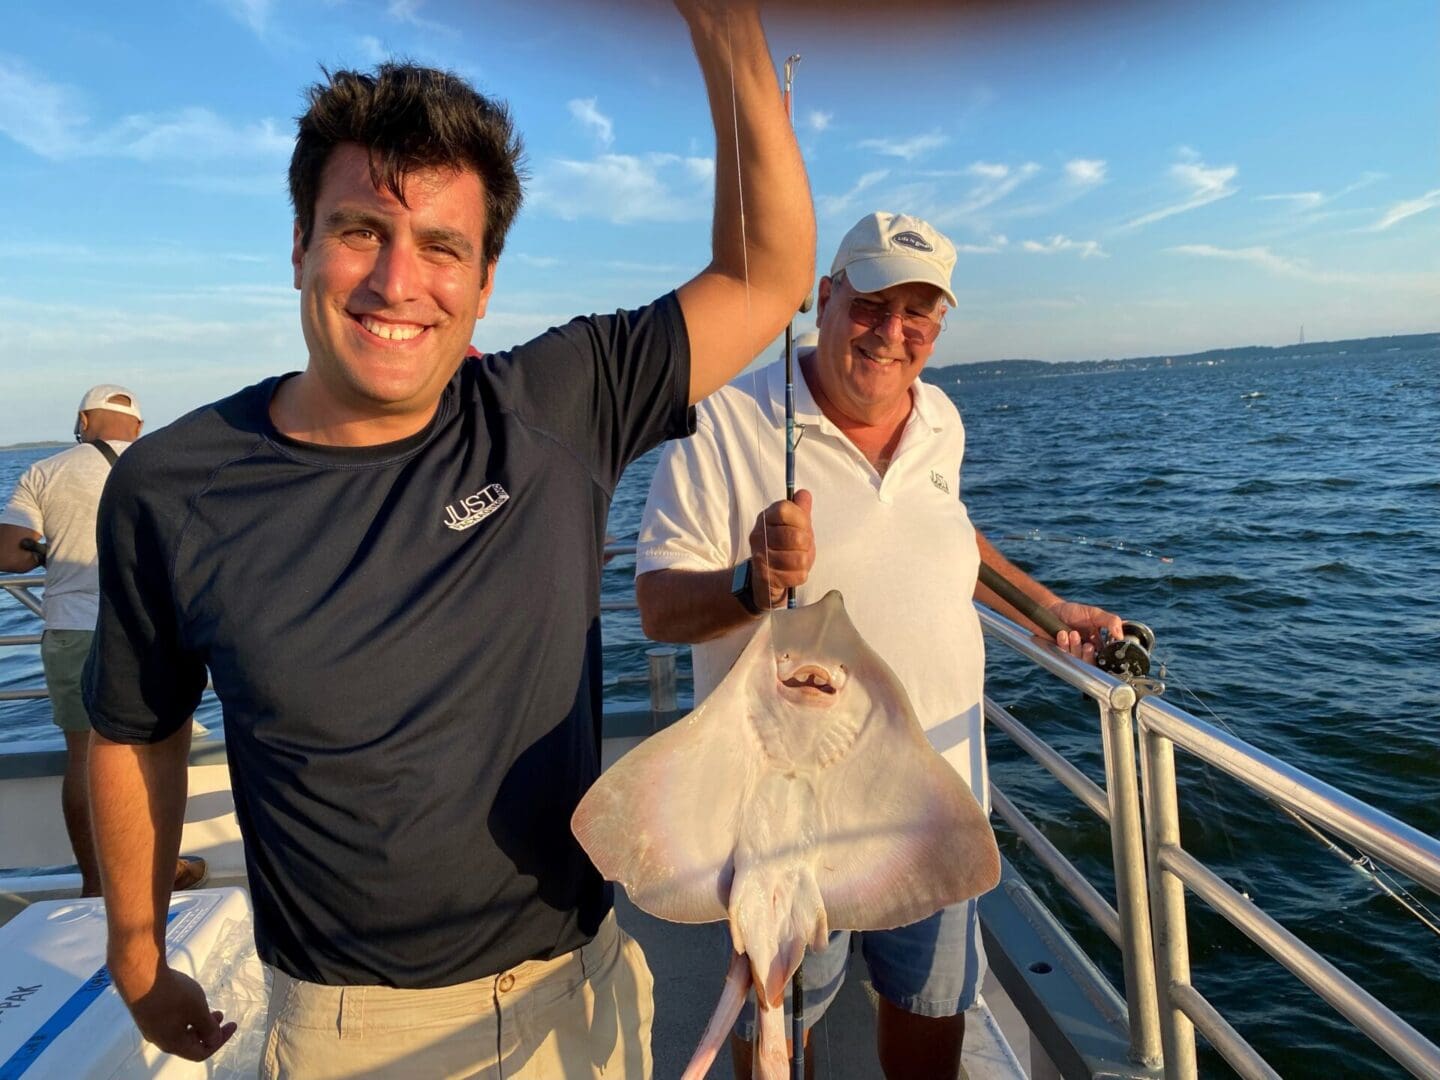 Two men on a boat holding up a stingray.